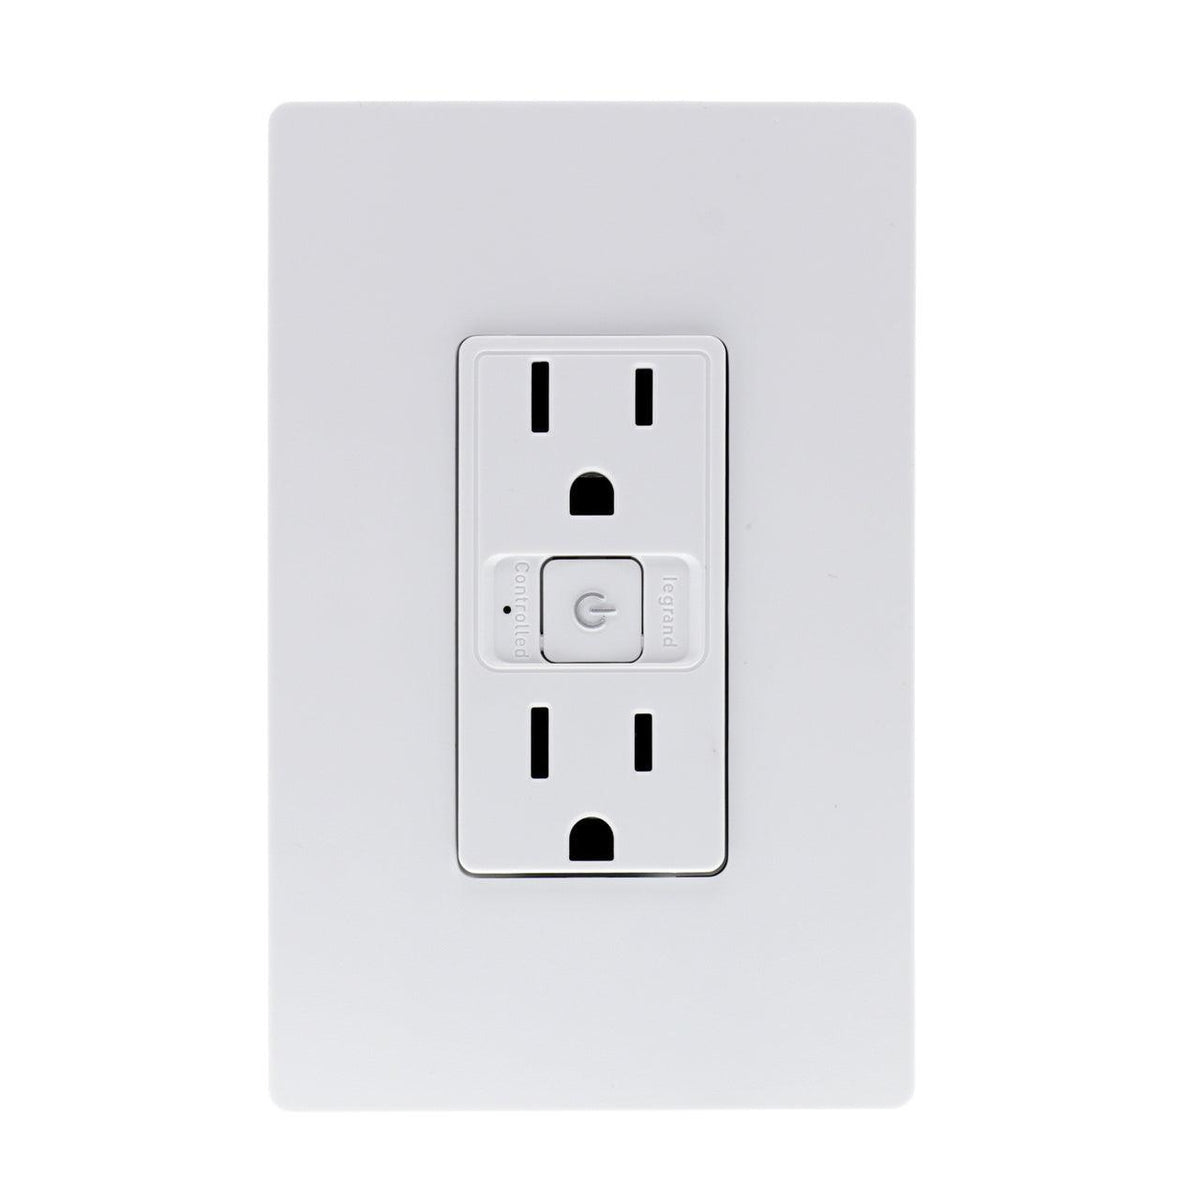 Legrand Radiant - radiant® Smart Outlet, Wi-Fi - WWRR15WHCACCV2 | Montreal Lighting & Hardware